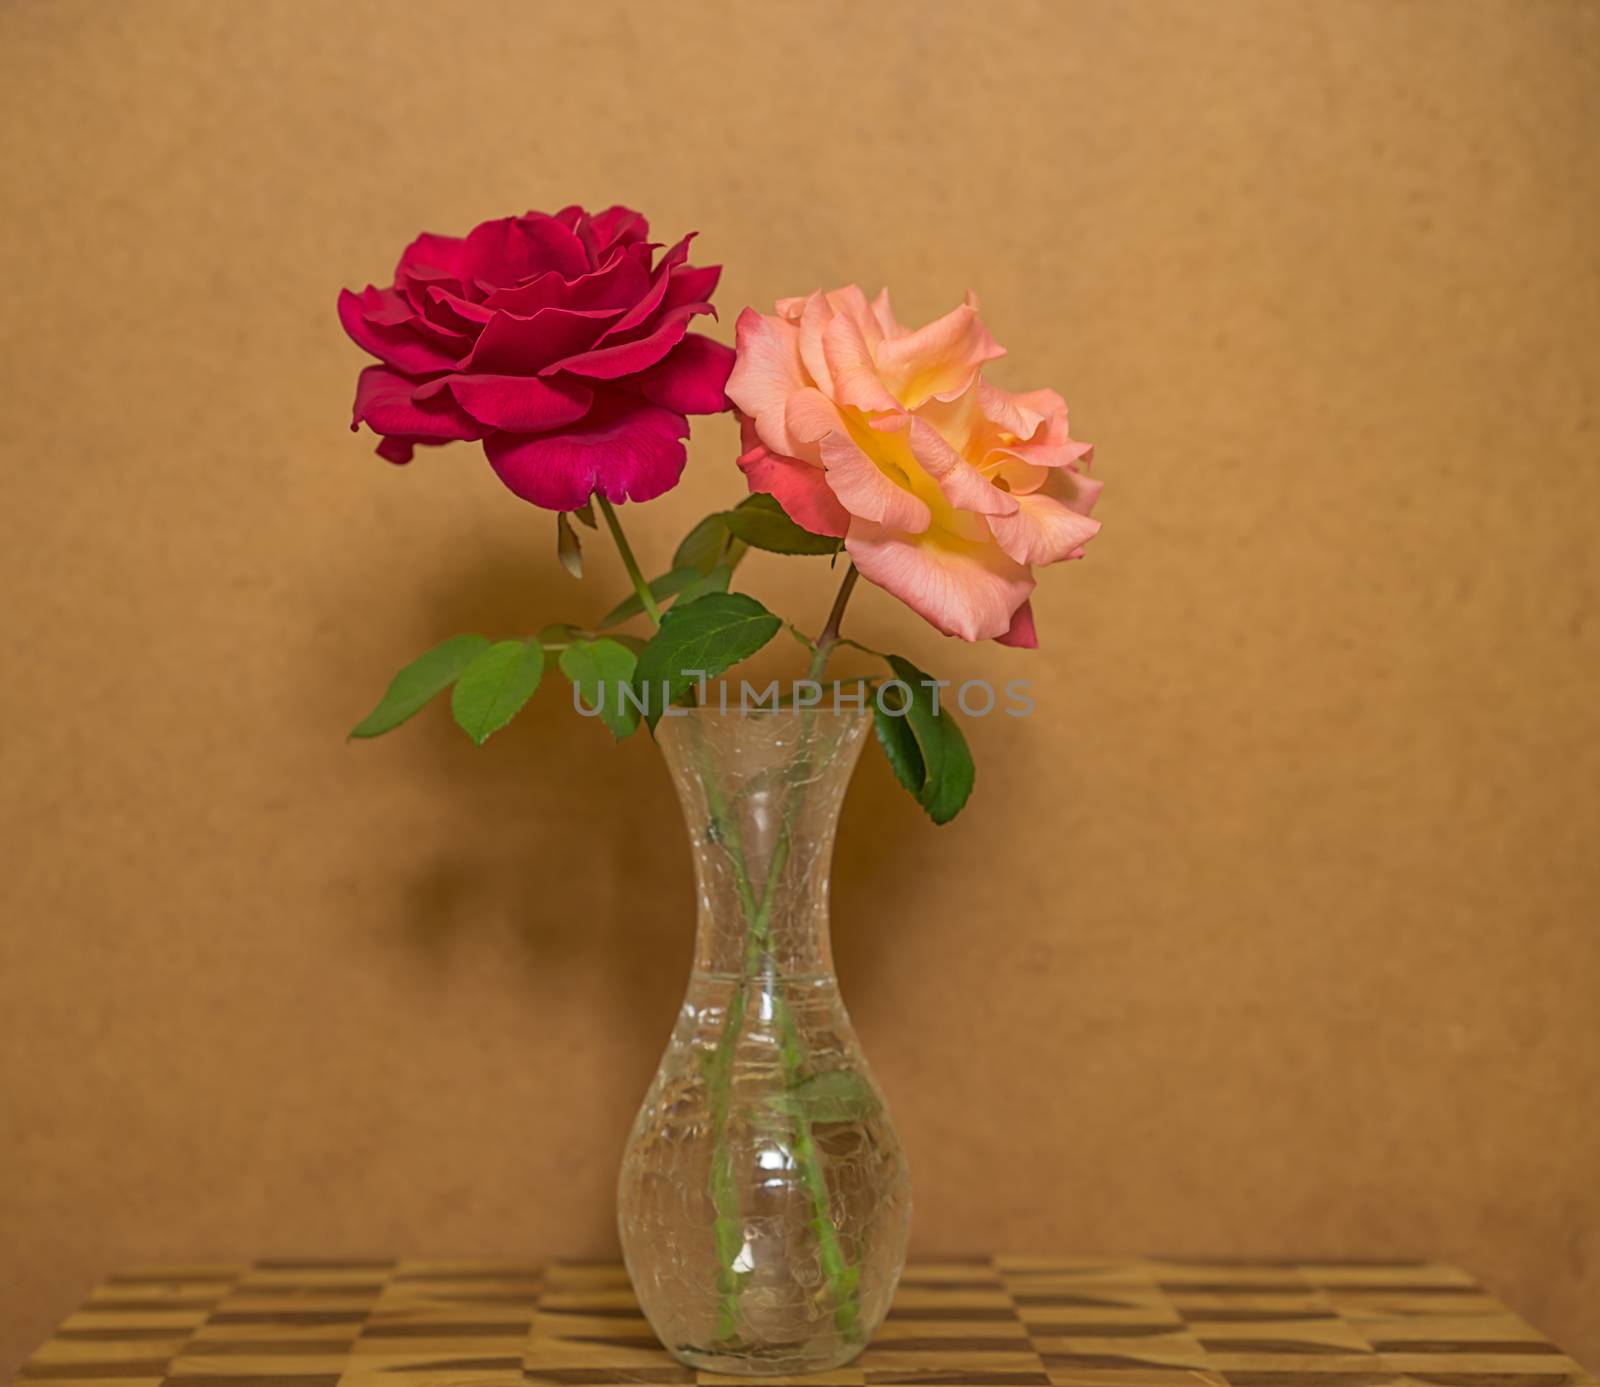 Two Roses in a Vase against Grunge background by sherj